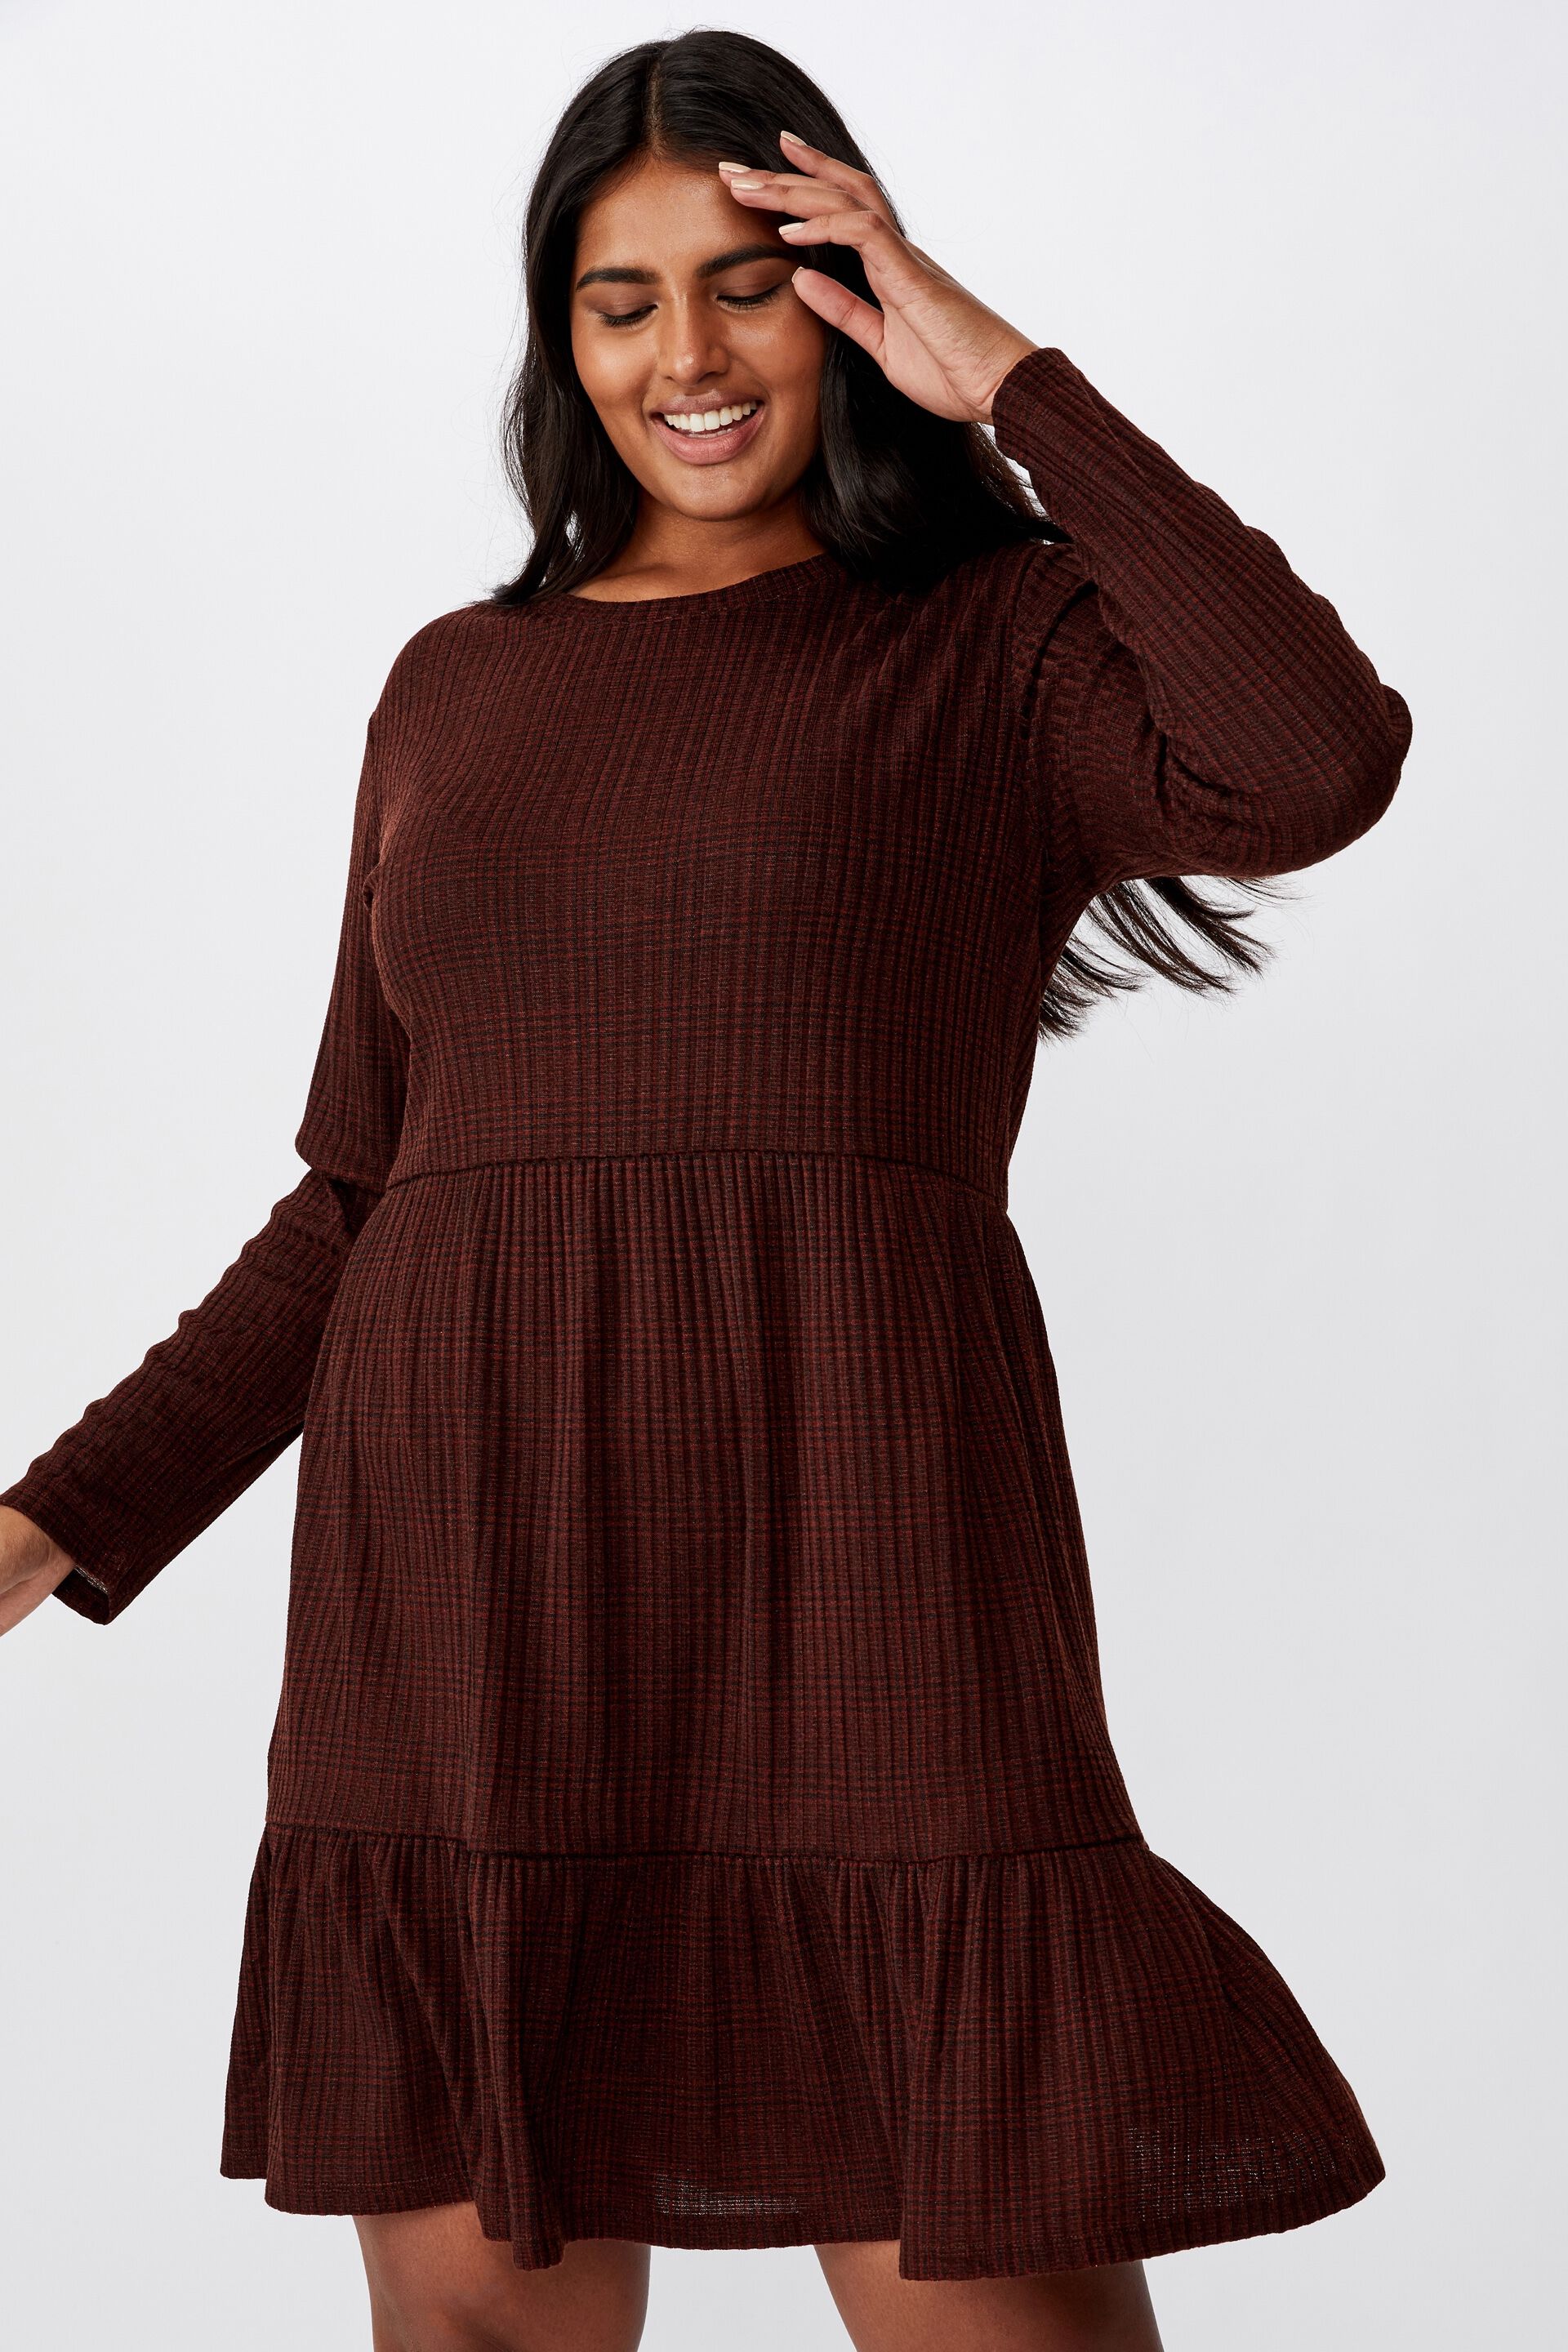 plus size baby doll dresses